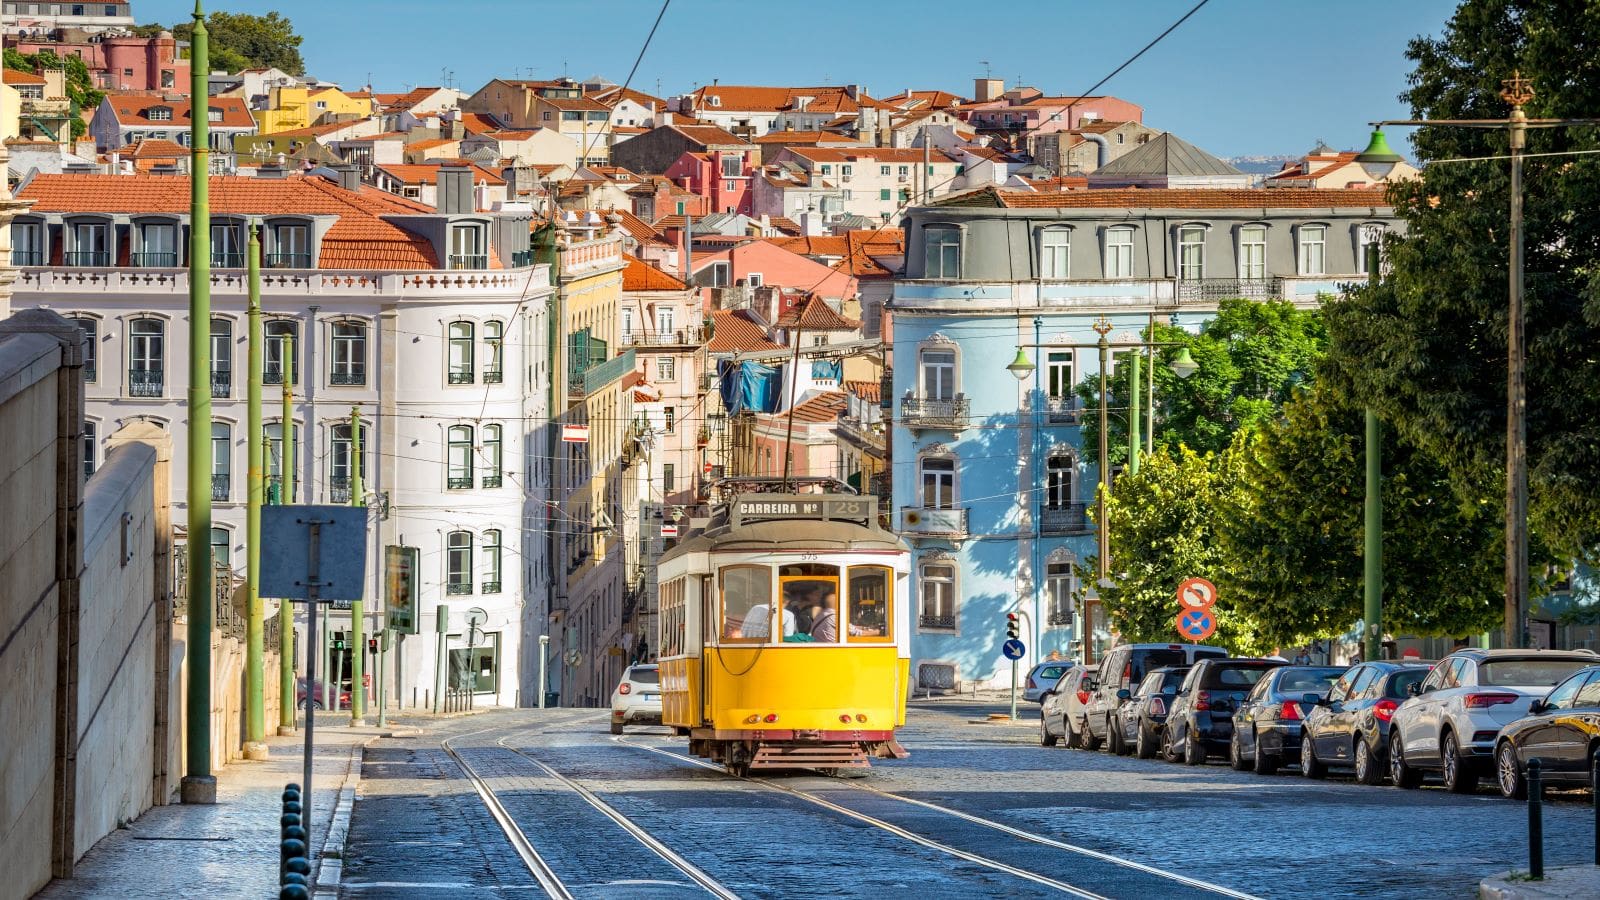 Yellow tram on line 28 in lisbon, portugal